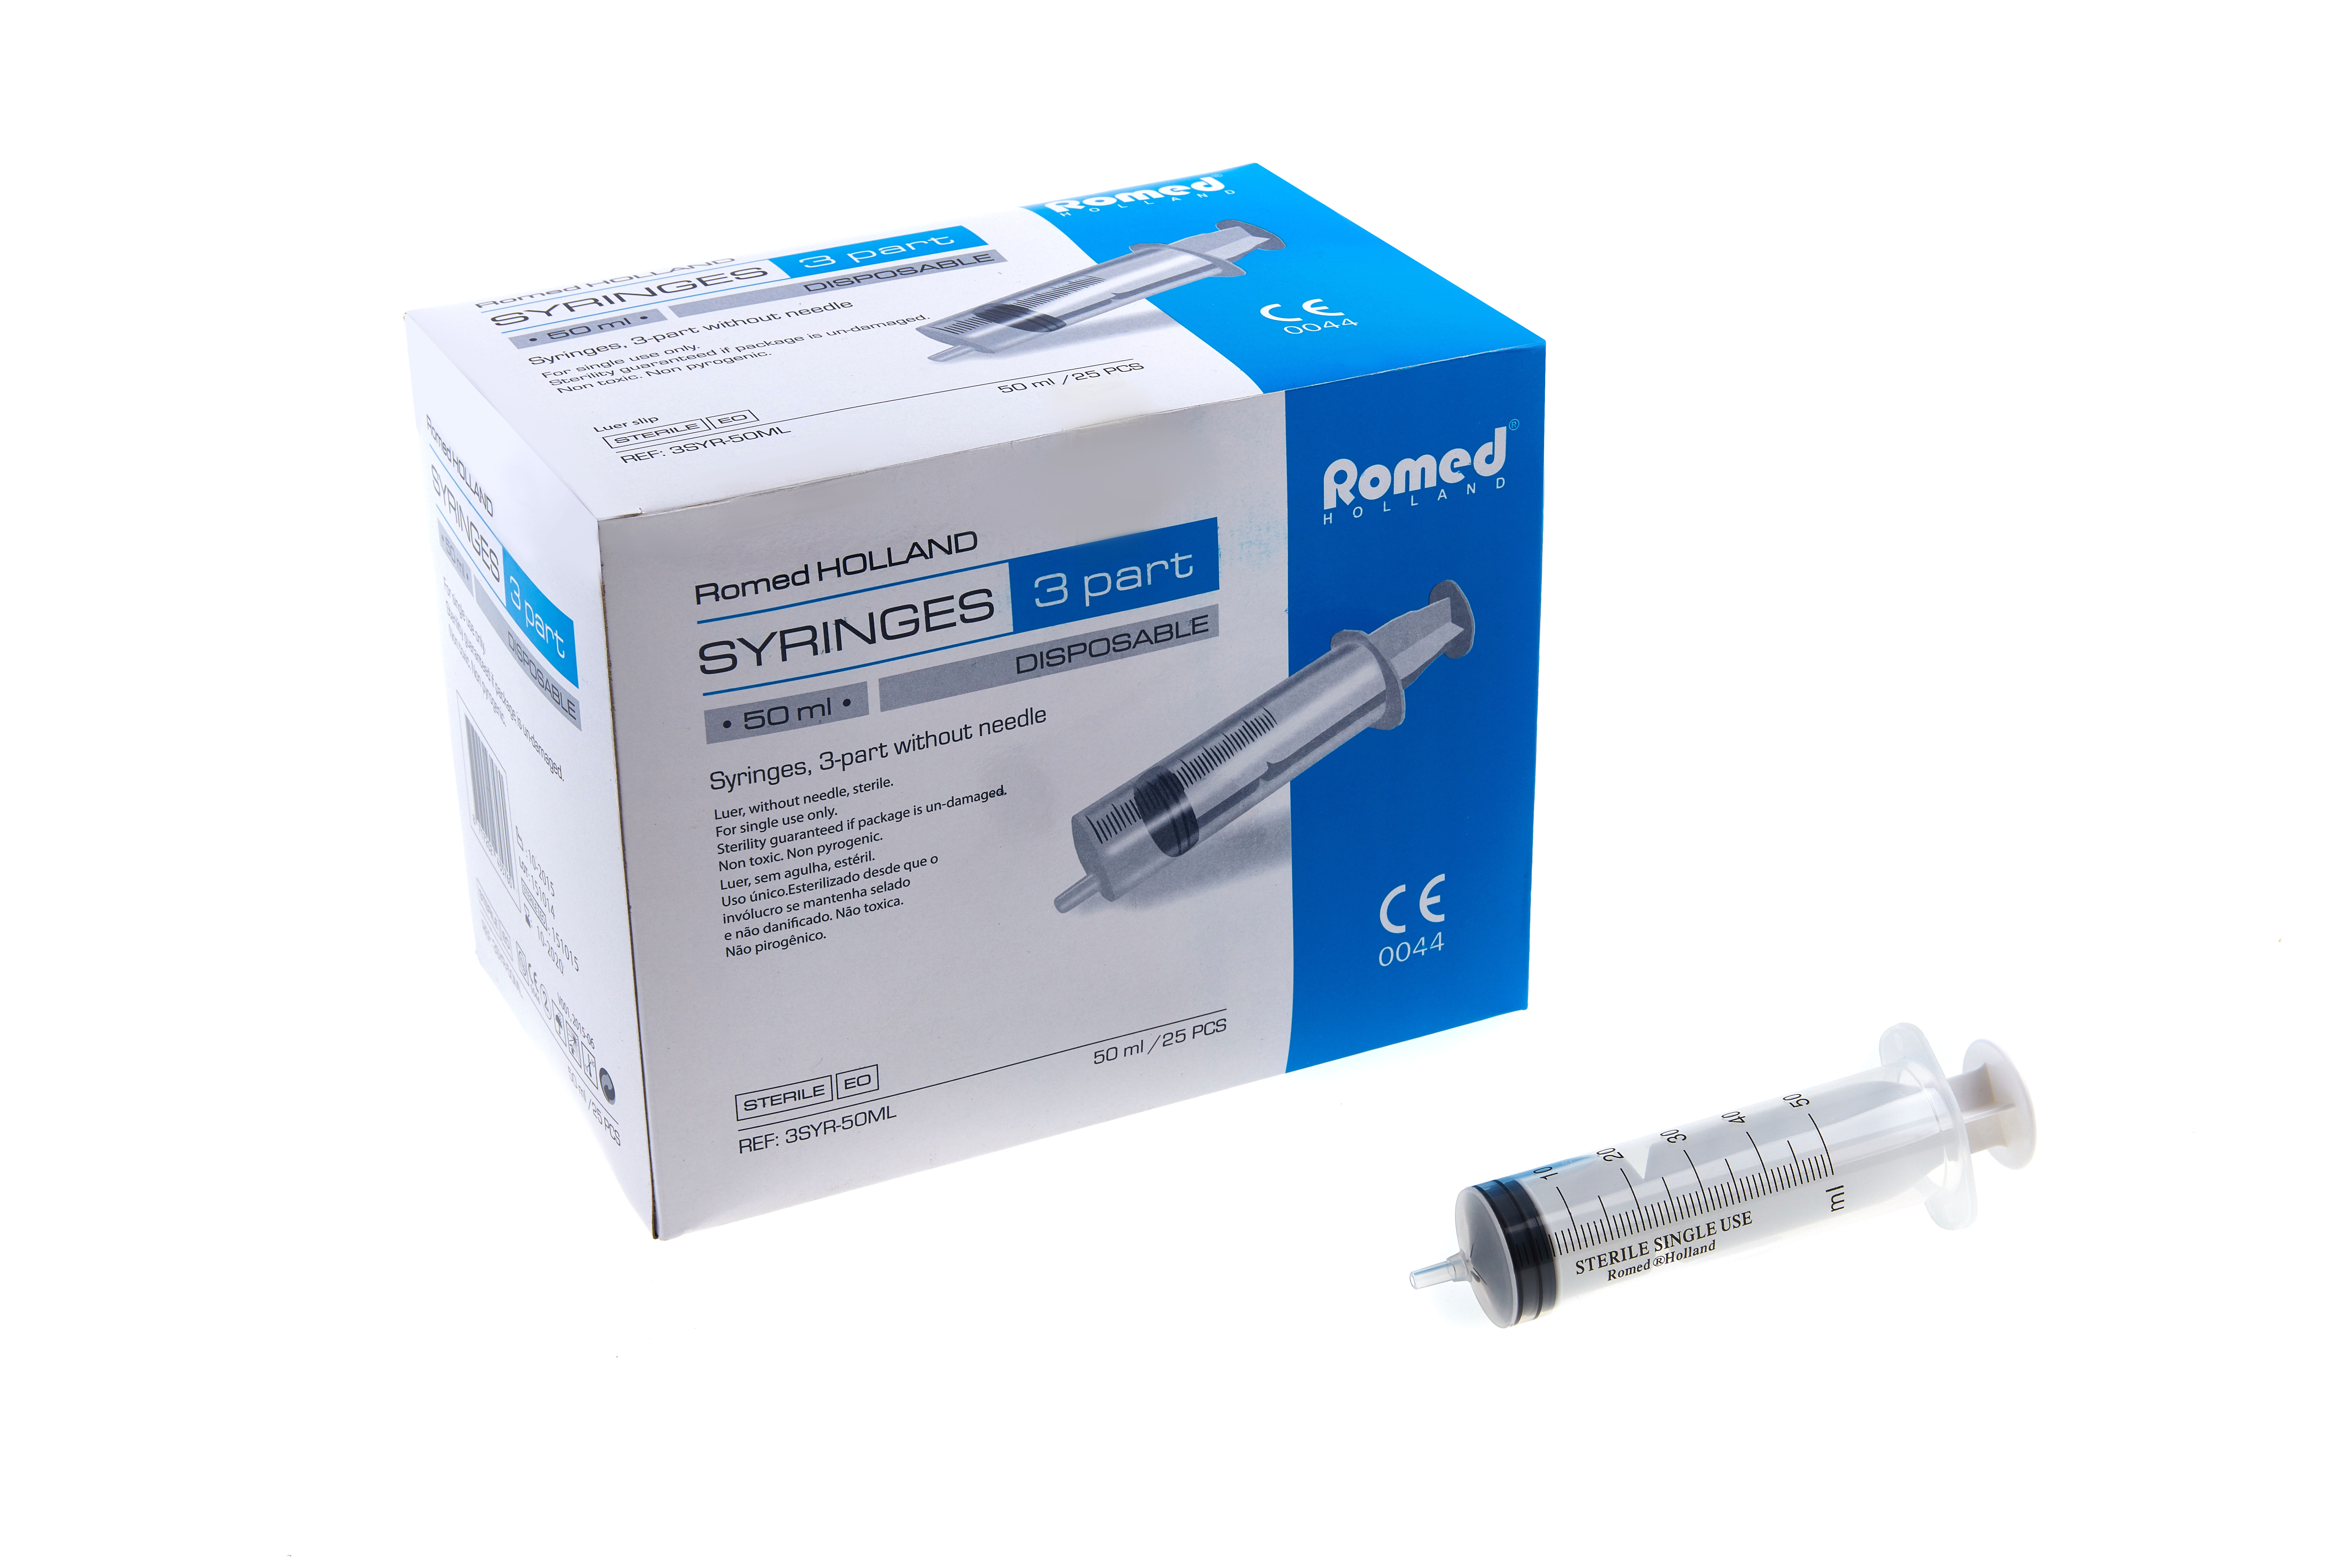 3SYR-50ML Romed 3-part syringes 50ml, without needle, sterile per piece, 25 pcs in an inner box, 16 x 25 pcs = 400 pcs in a carton.